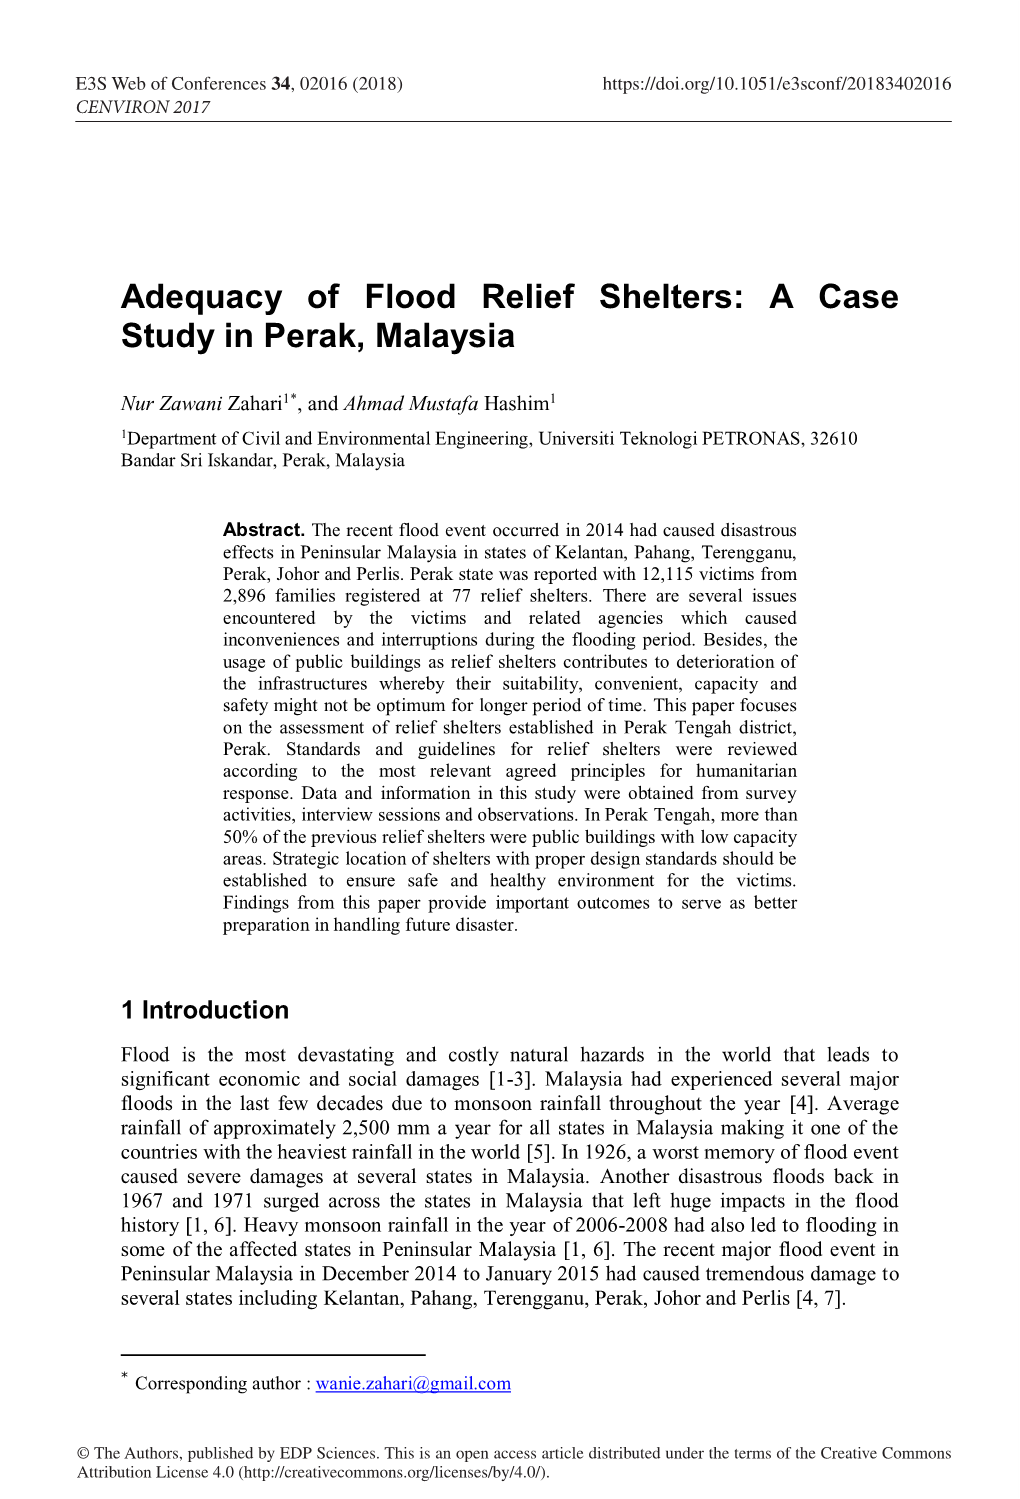 Adequacy of Flood Relief Shelters: a Case Study in Perak, Malaysia